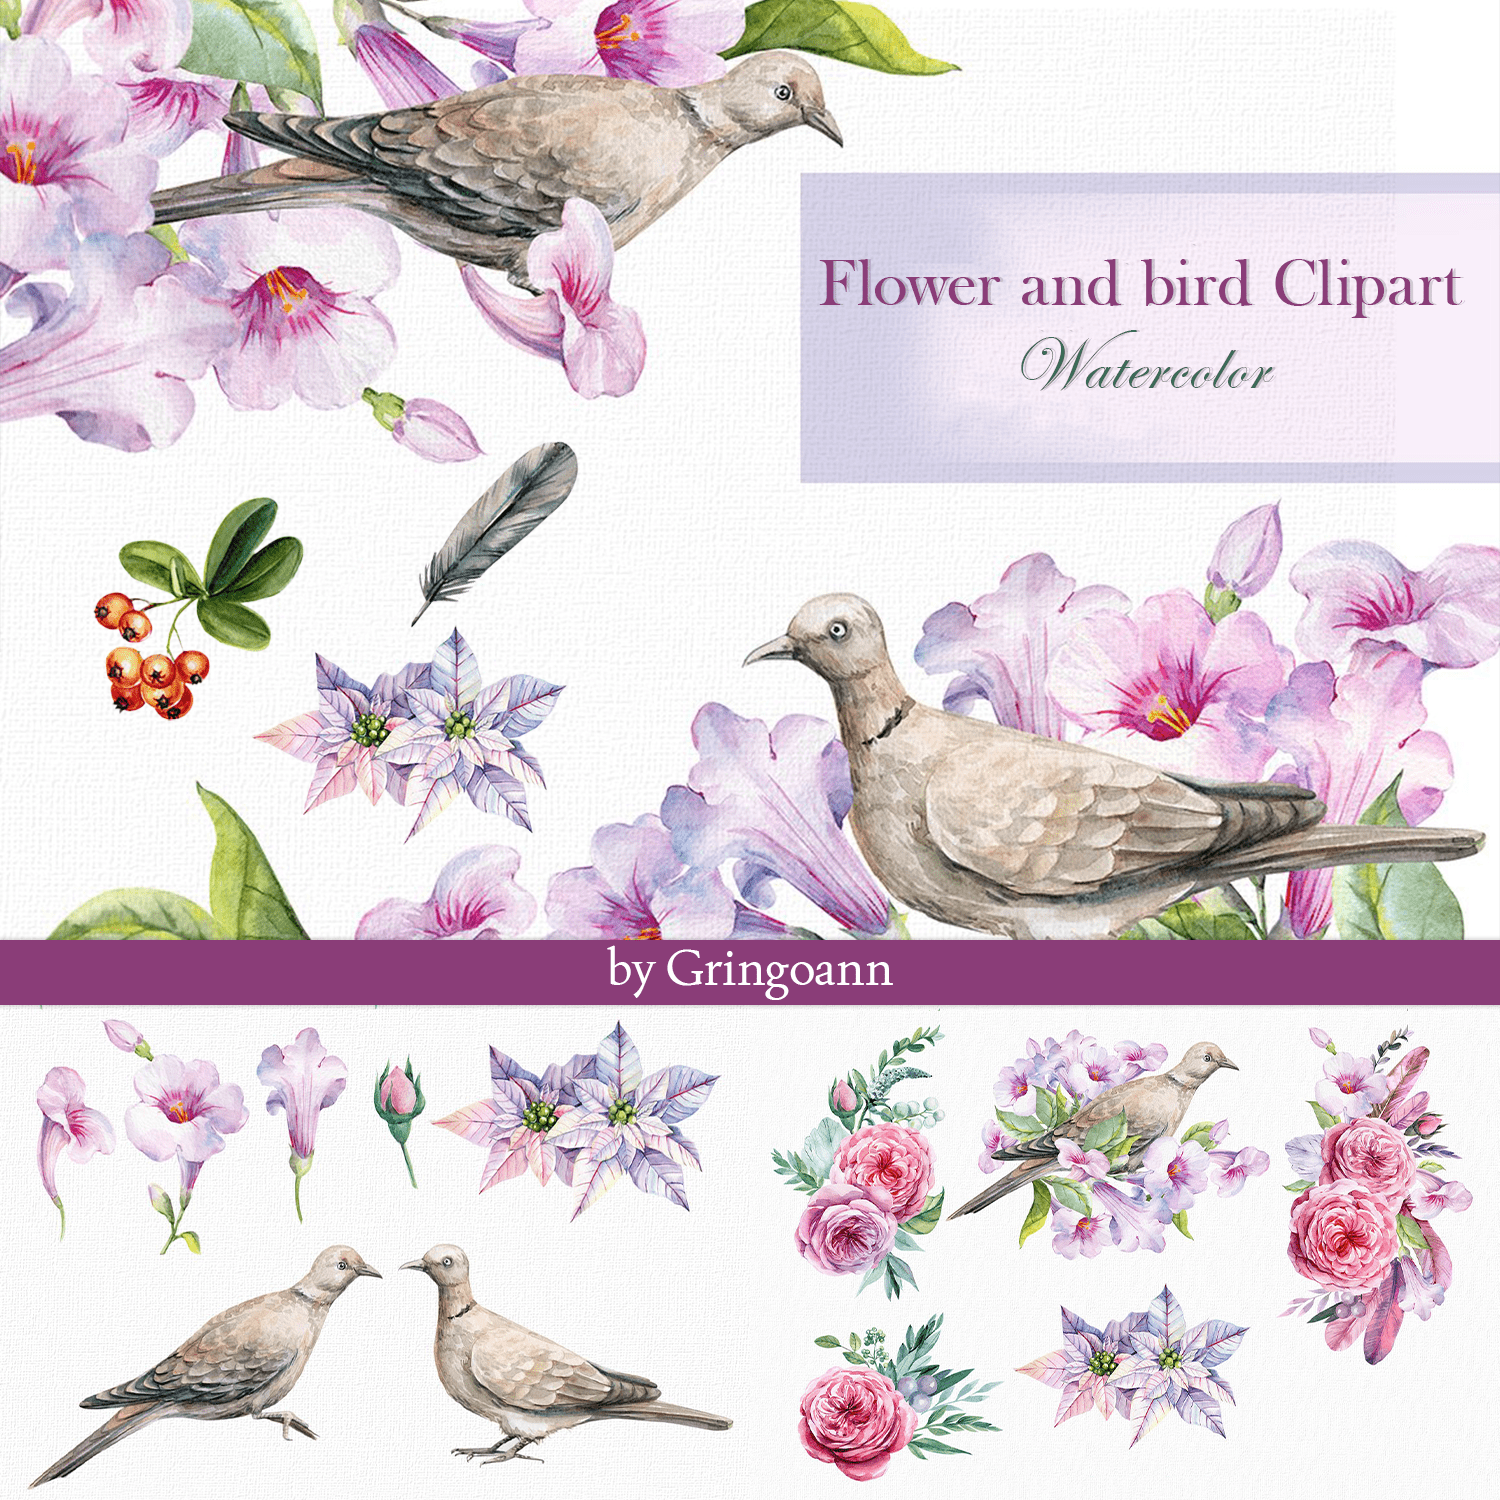 flower and bird clipart. watercolor.